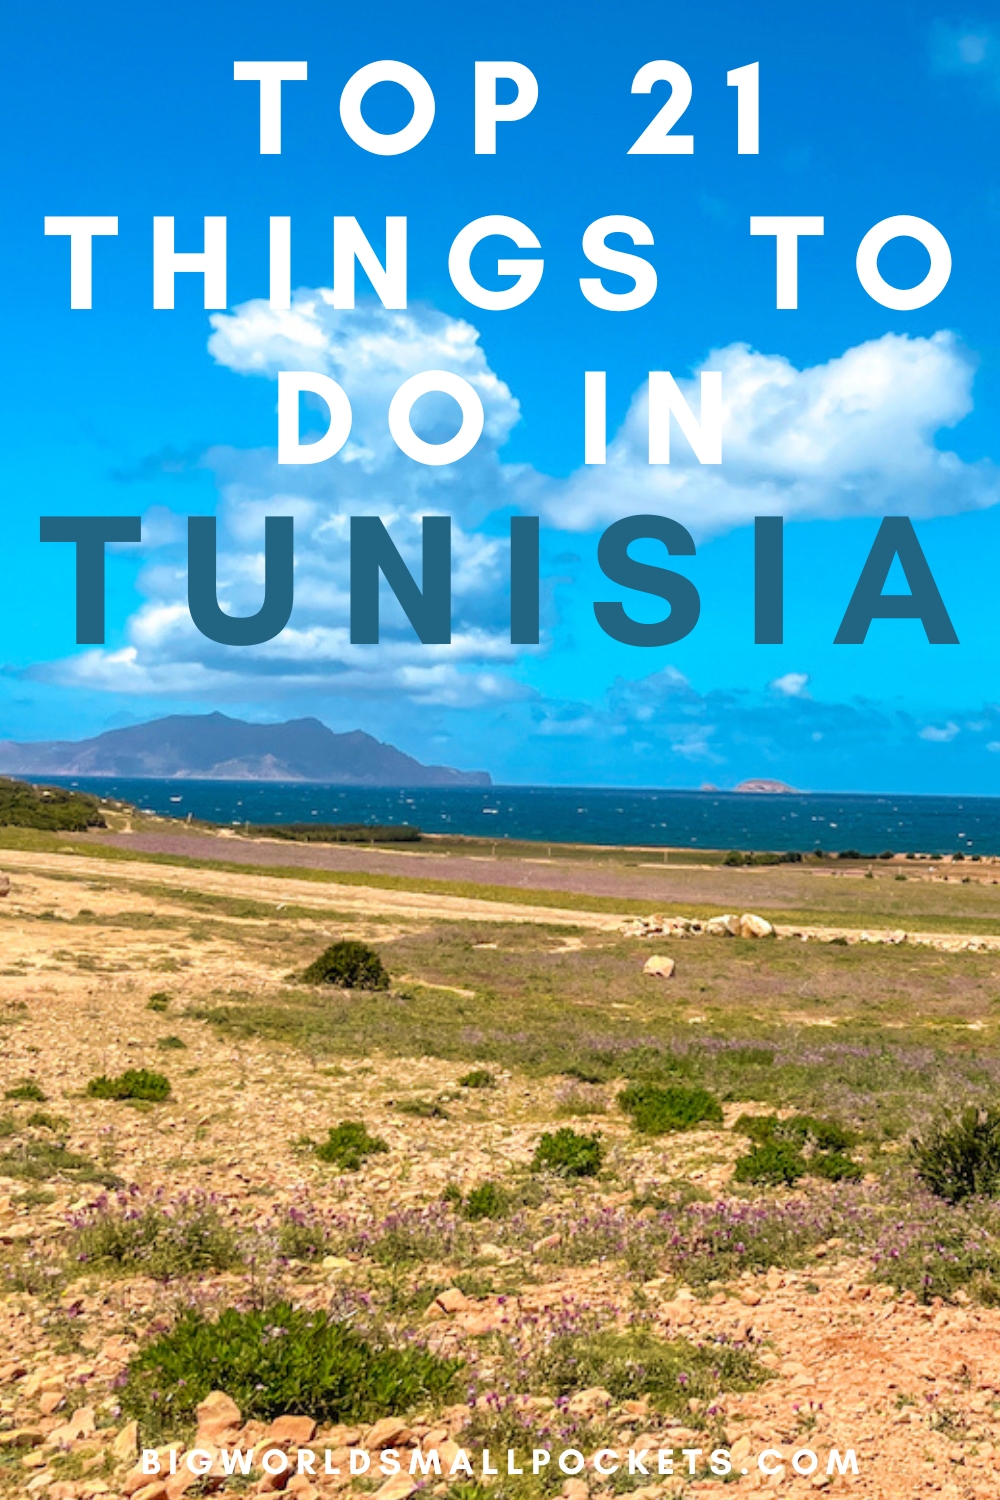 Best 21 Things to Do in Tunisia